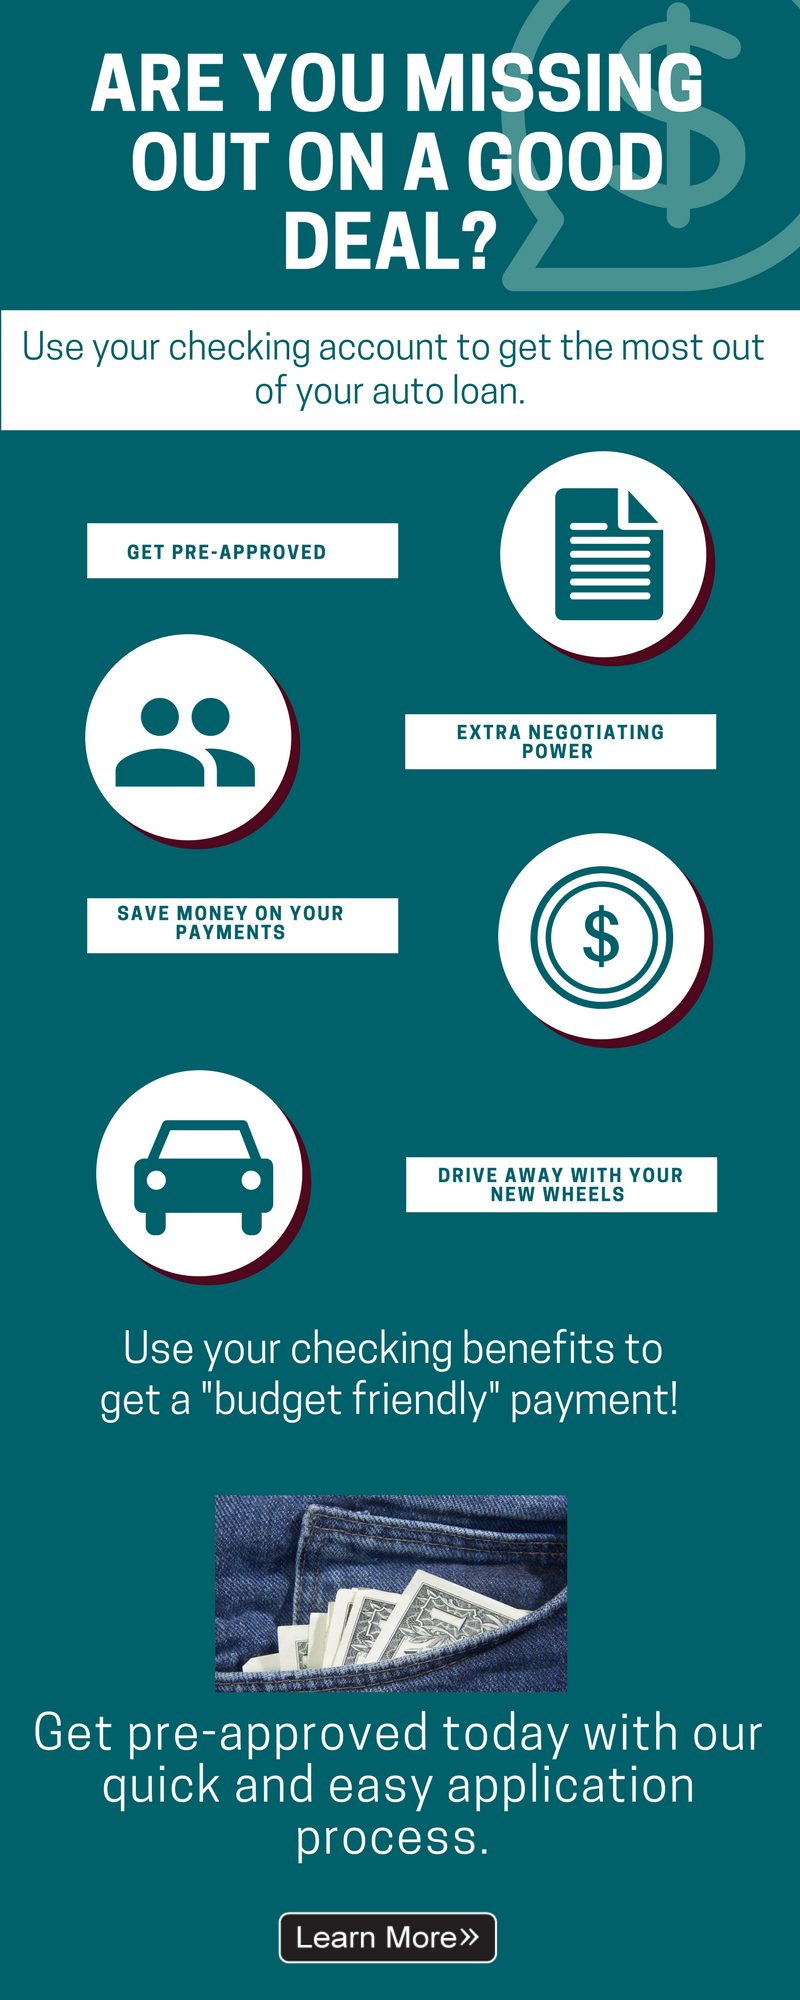 Are you missing out on a good deal?  Use your checking account to get the most our of your auto loan.  Get pre-approved, extra negotiating power, save money on your payments, drive away with your new wheels. Use your checking benefits to get a budget friendly payment. Get pre-approved today with our quick and easy application process. Learn more.